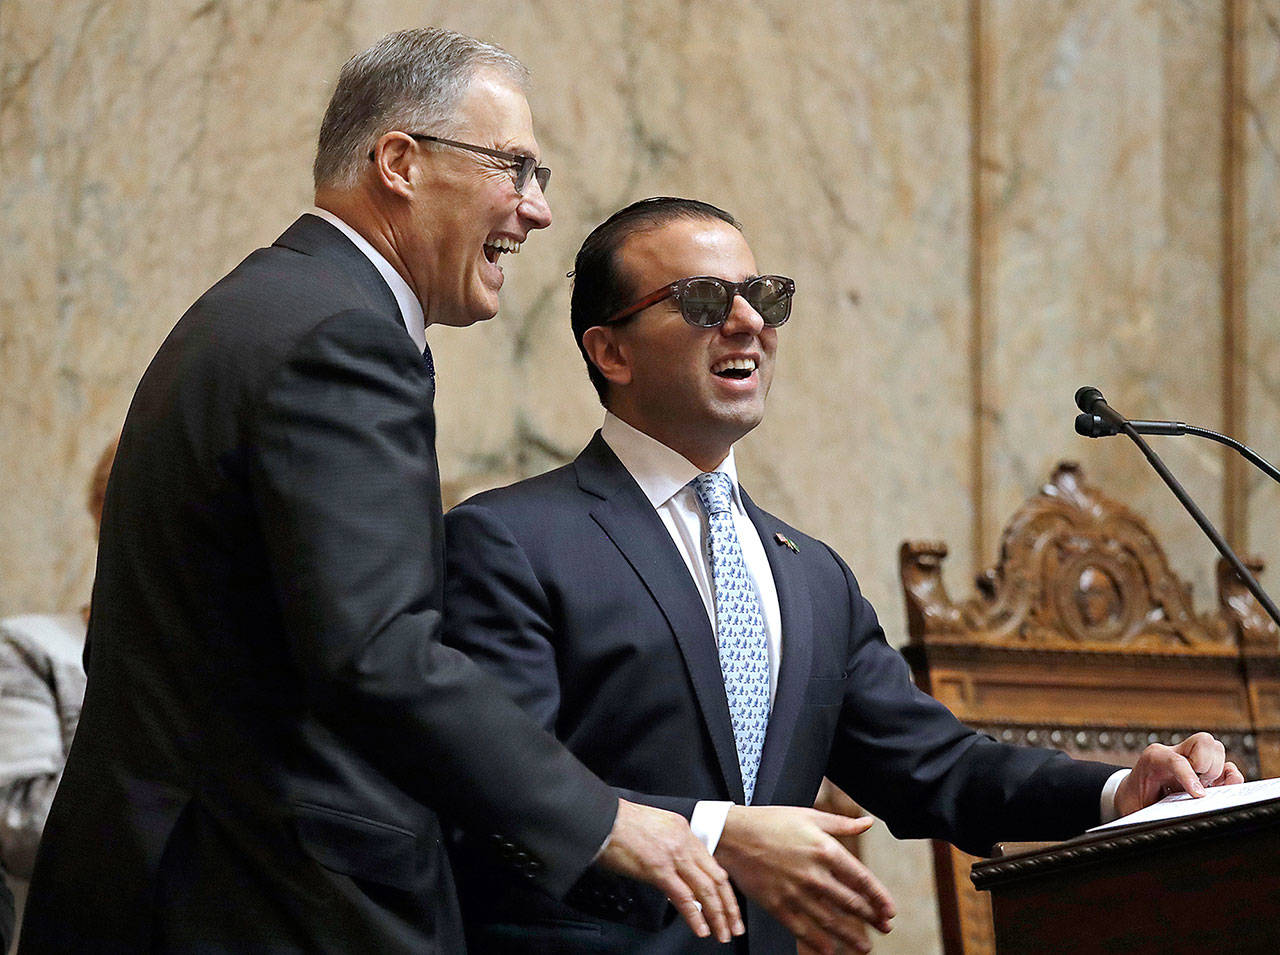 Gov. Jay Inslee (left) is introduced by Lt. Gov. Cyrus Habib for Inslee’s annual state-of-the-state address before a joint legislative session Tuesday in Olympia. (AP Photo/Elaine Thompson)